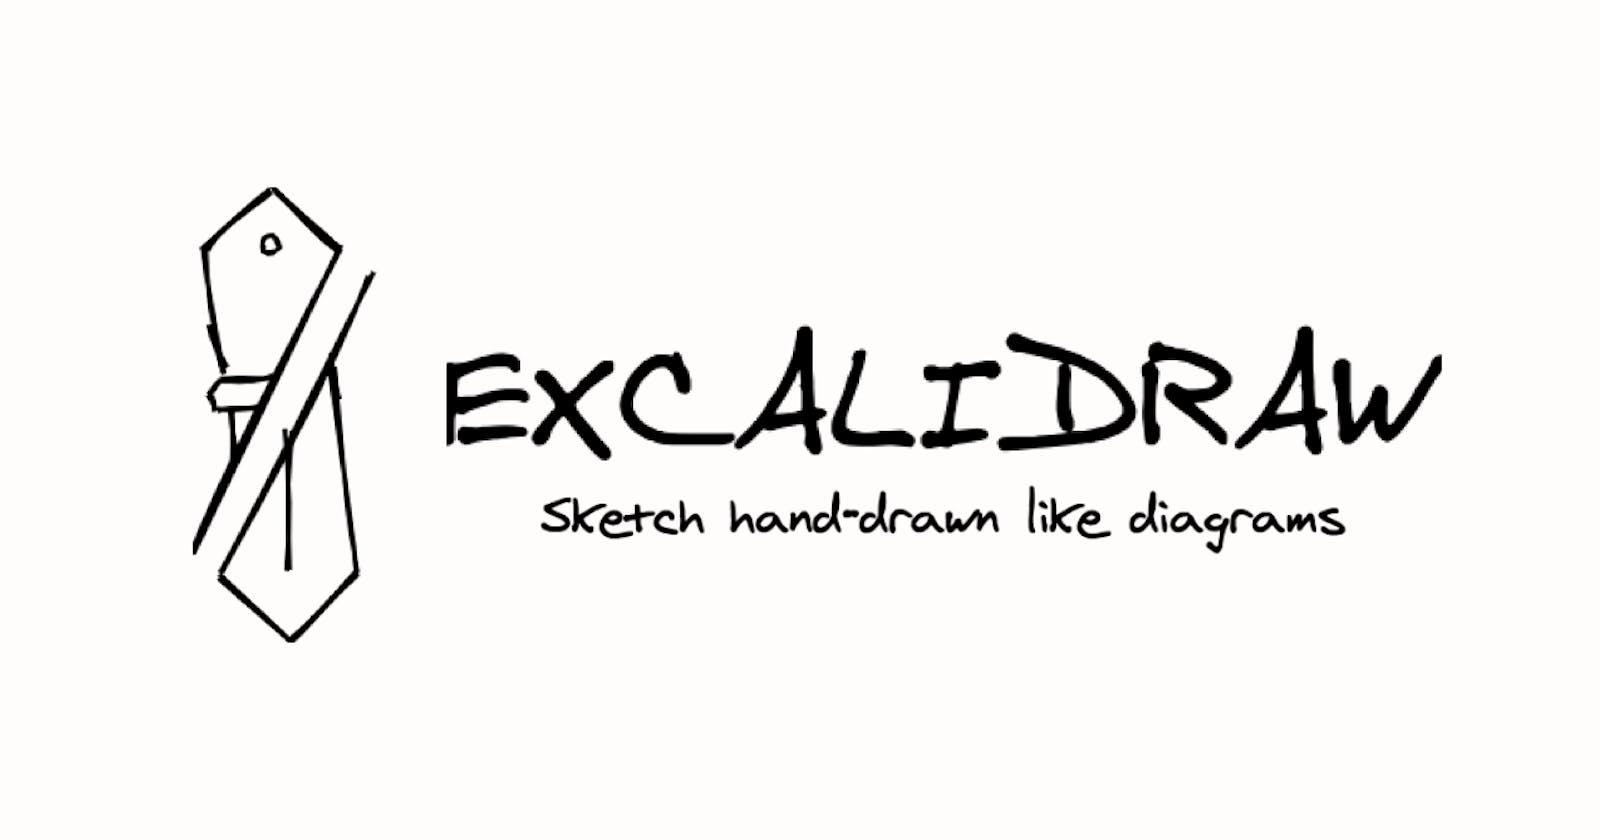 Excalidraw as a Tool for unlocking your diagram creation process